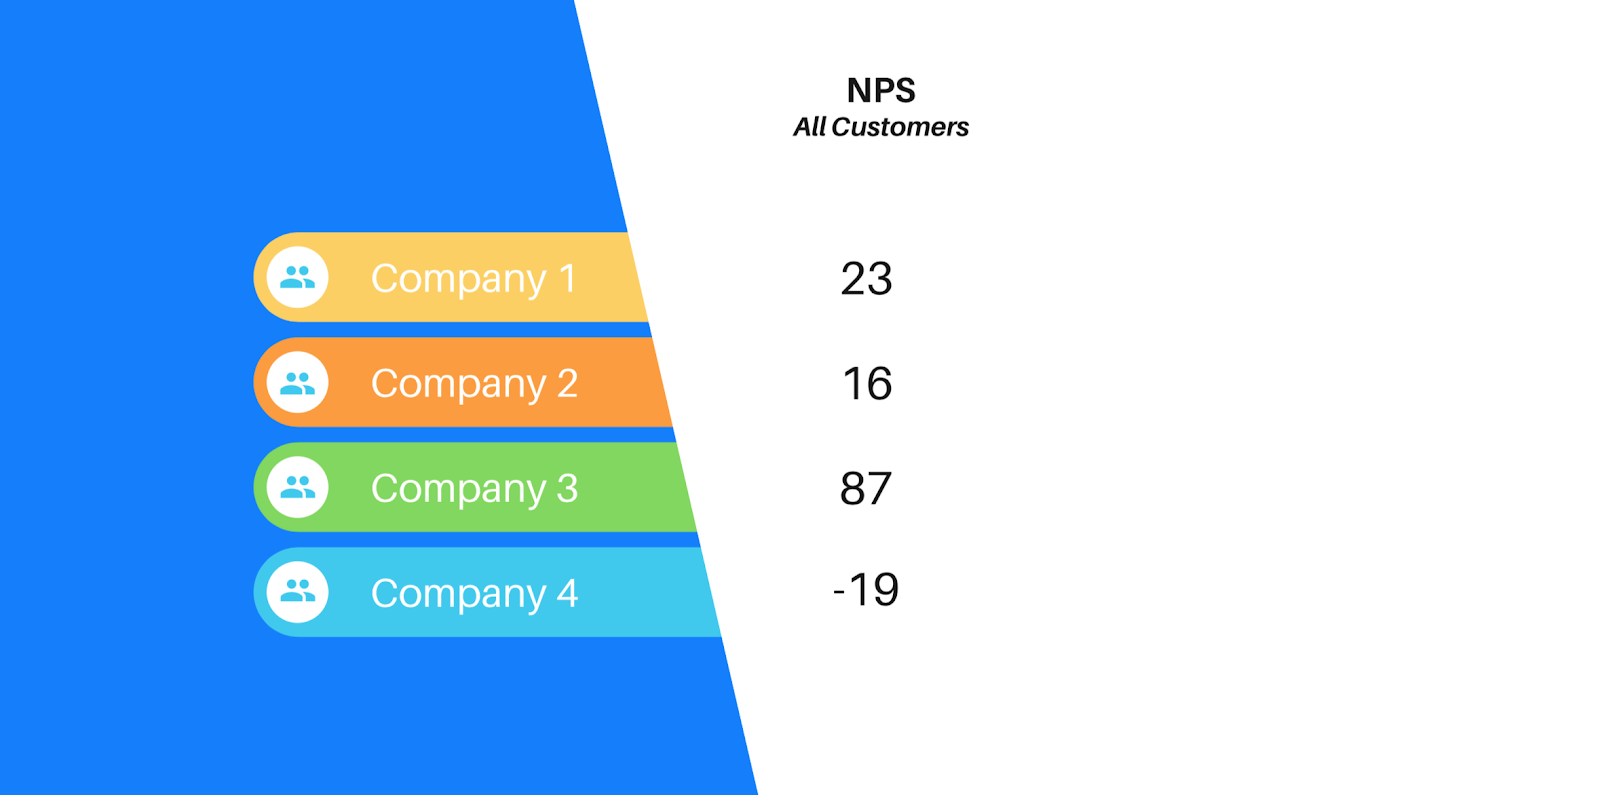 NPS scores of 4 anonymous businesses 